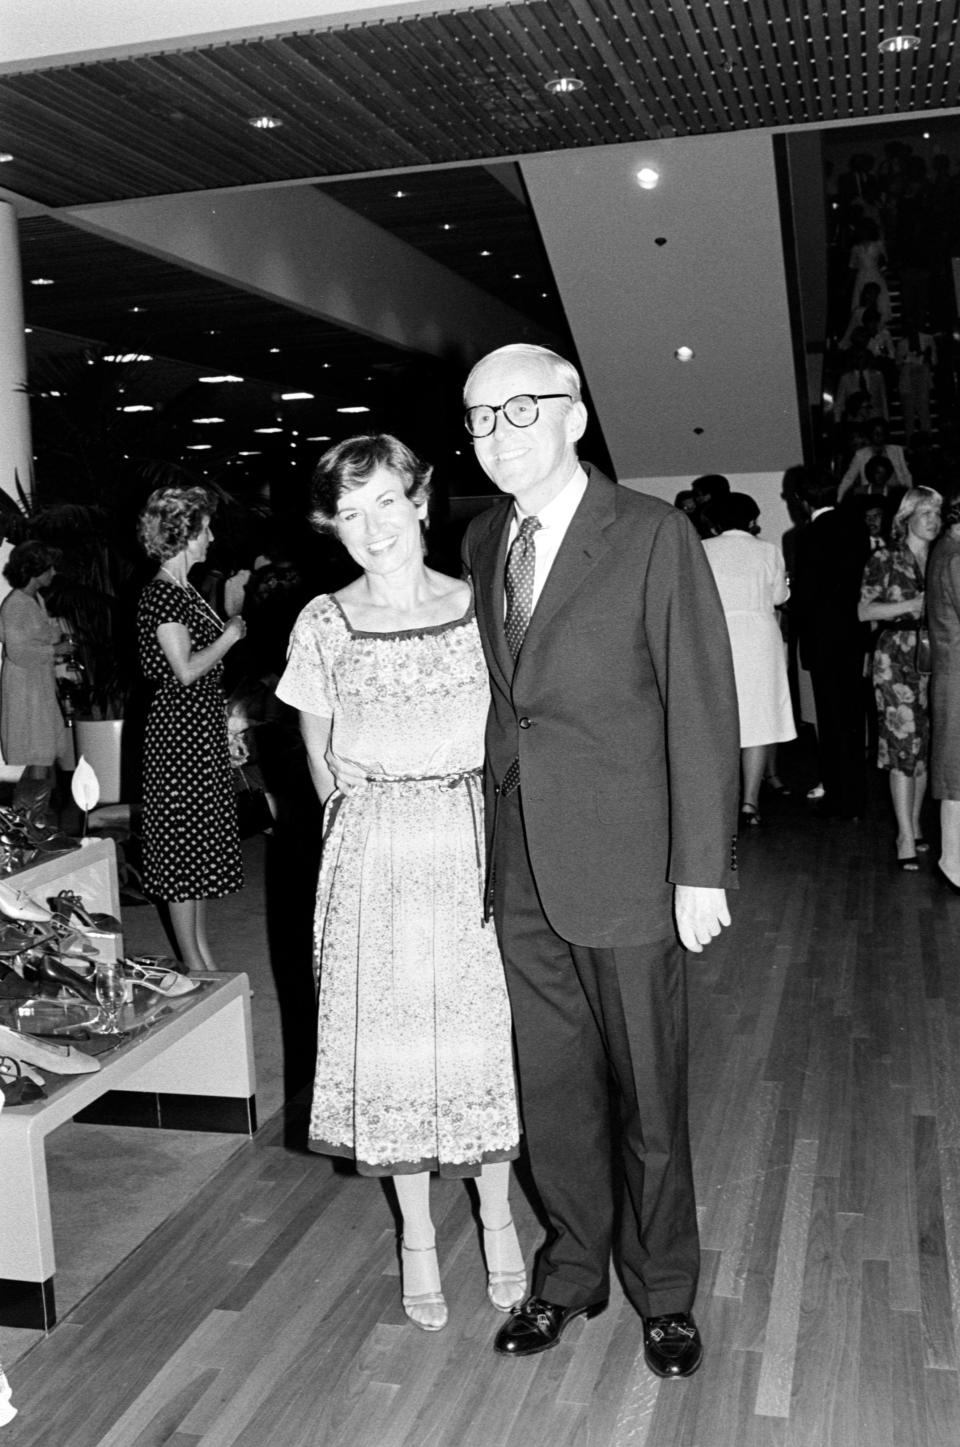 Fran Nordstrom and Bruce Nordstrom attend the opening of Nordstrom's Fashion Valley Store in California on August 31, 1981.